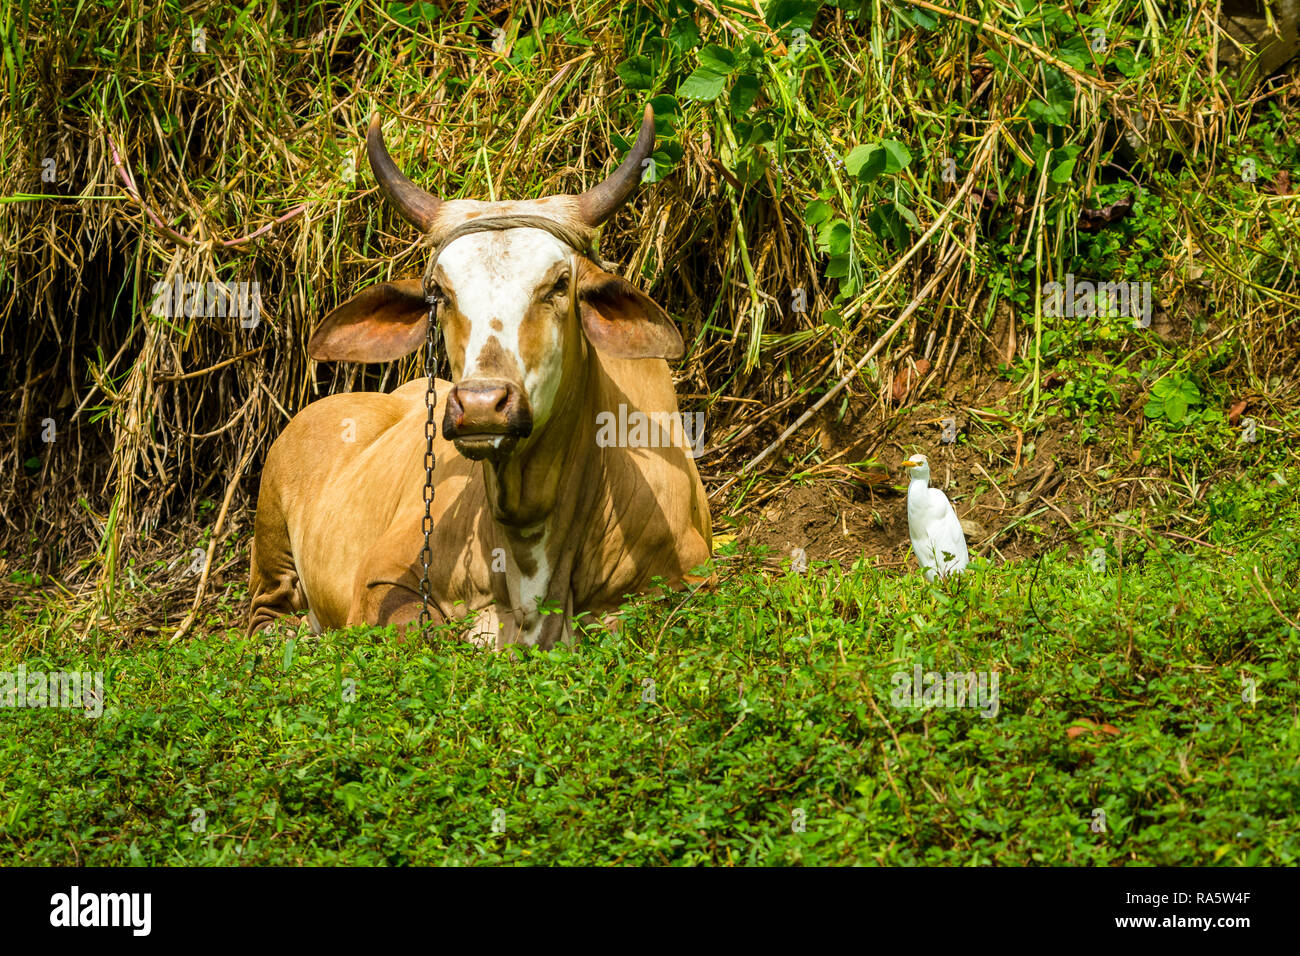 Tobago culture and animal welfare.  Large, horned cow, chained to a stake and lying down in the Rain Forest with a white Egret bird to the right. Stock Photo